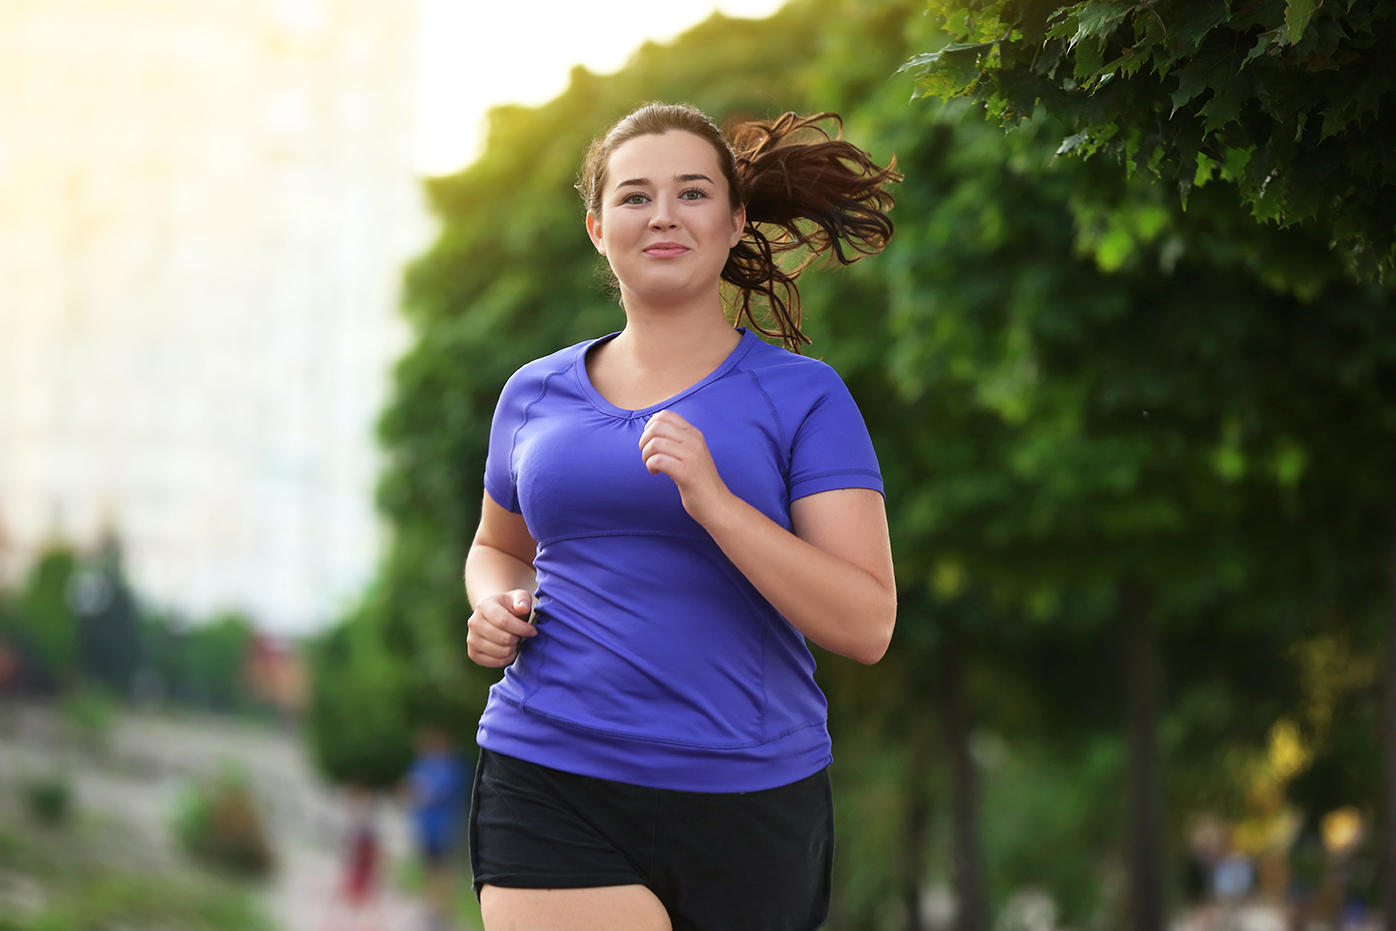 Woman running to lose weight